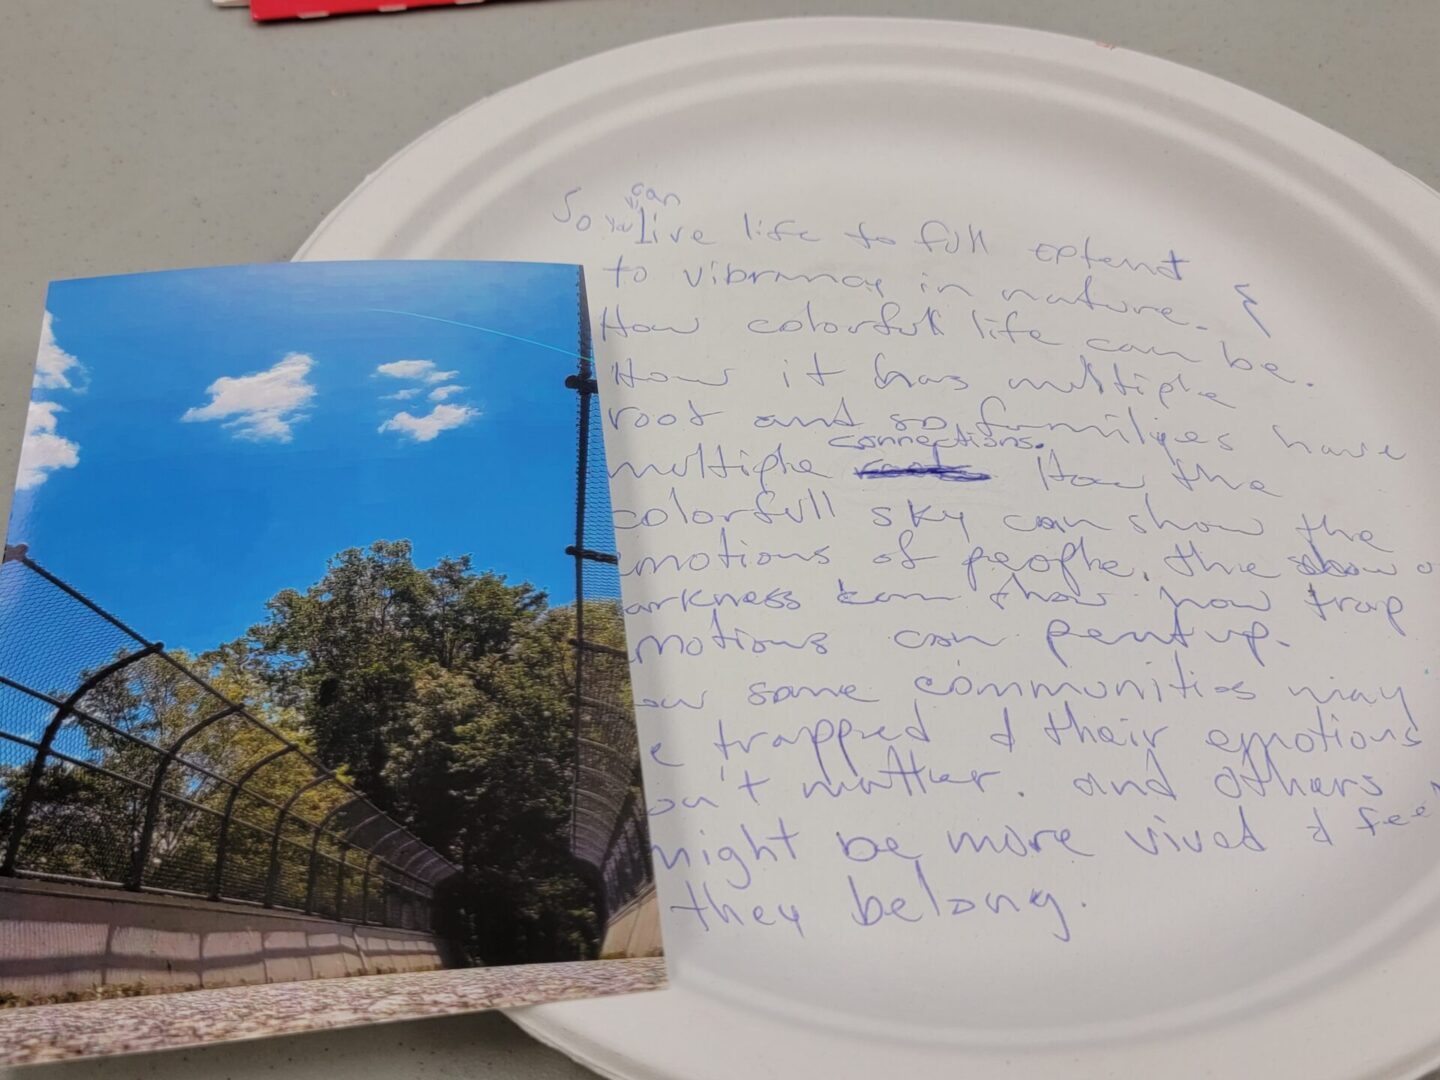 Student reflection on their own photography